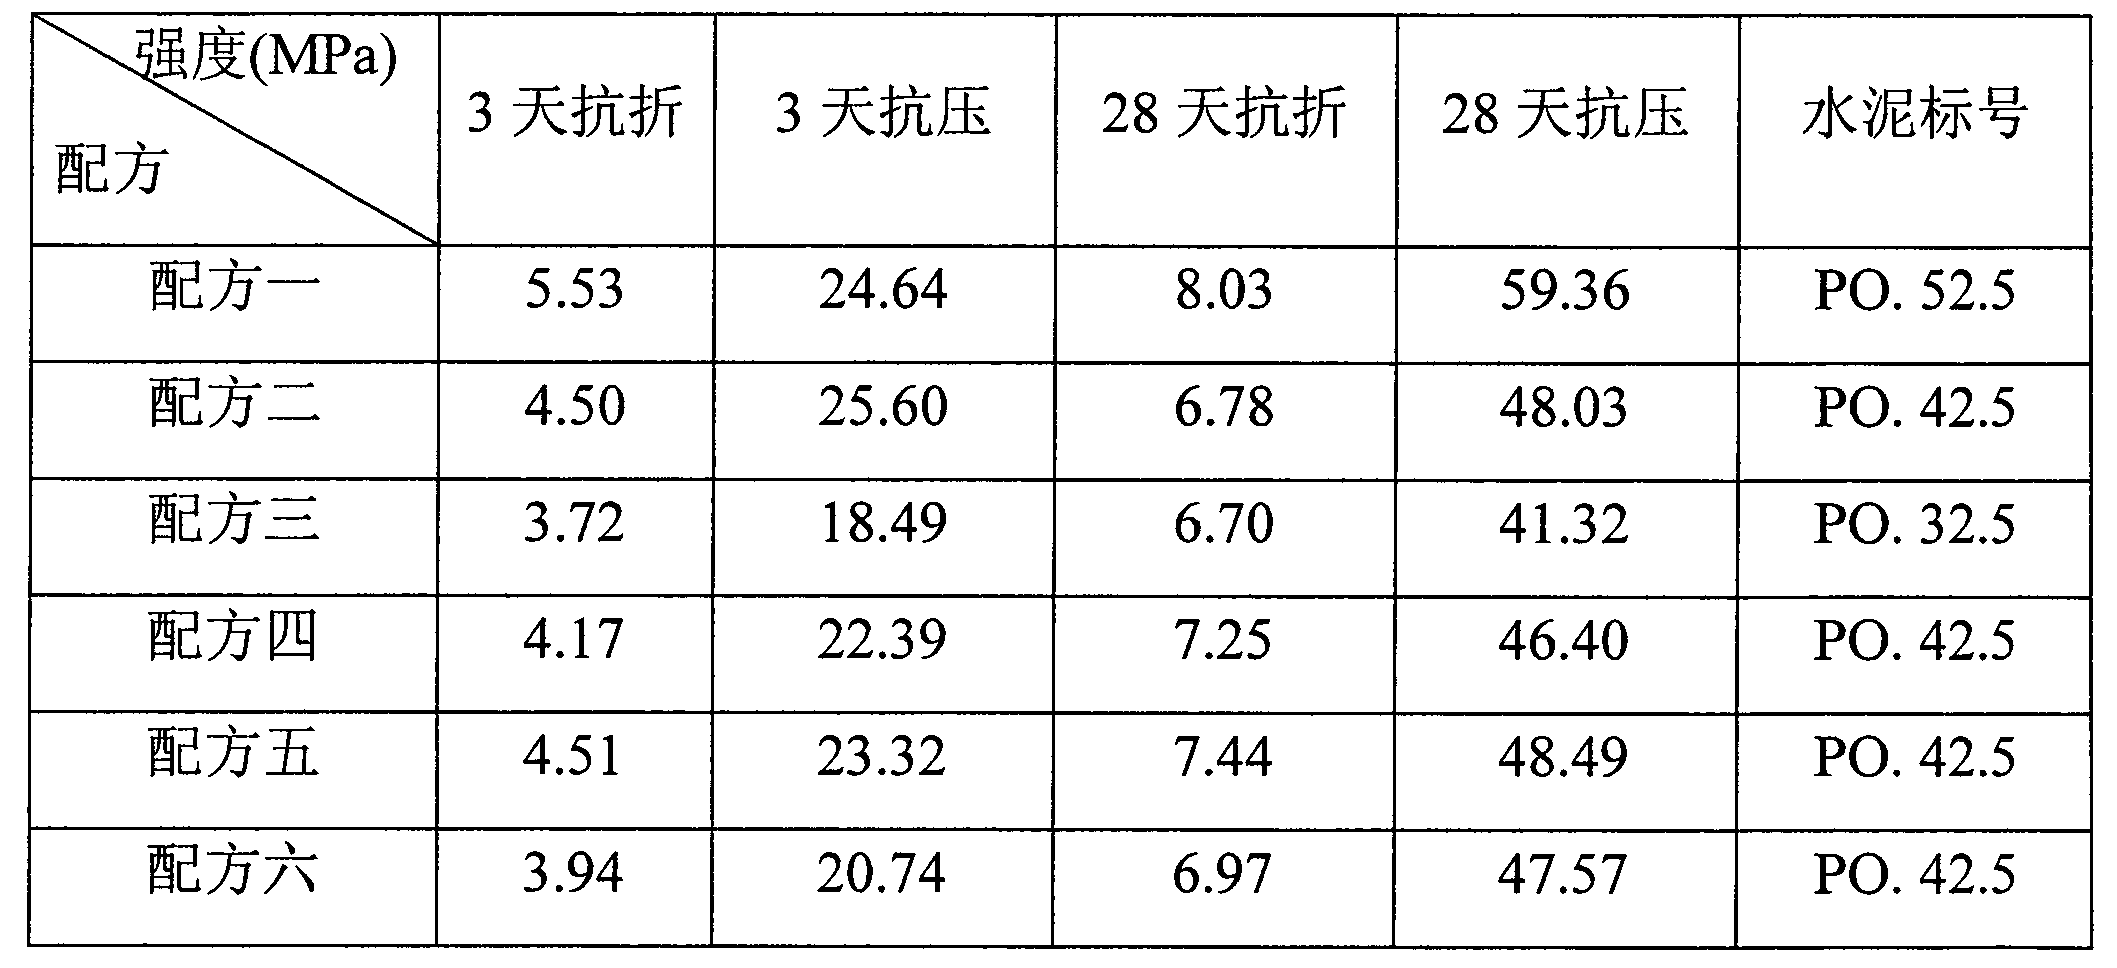 Cement admixture prepared from tungsten tailings and application of cement admixture